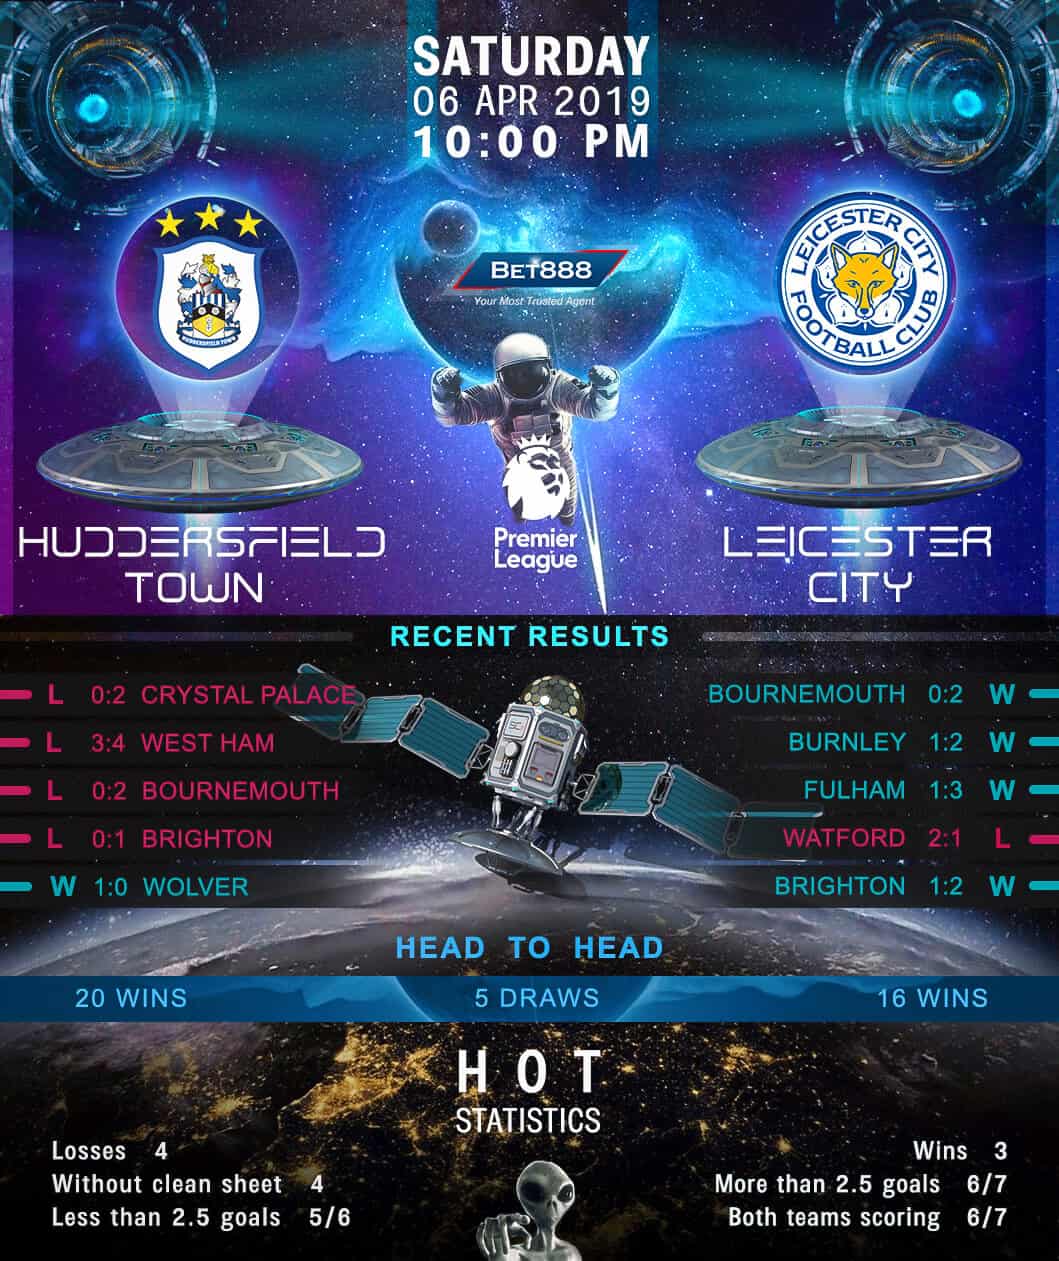 Huddersfield Town vs Leicester City 06/04/19